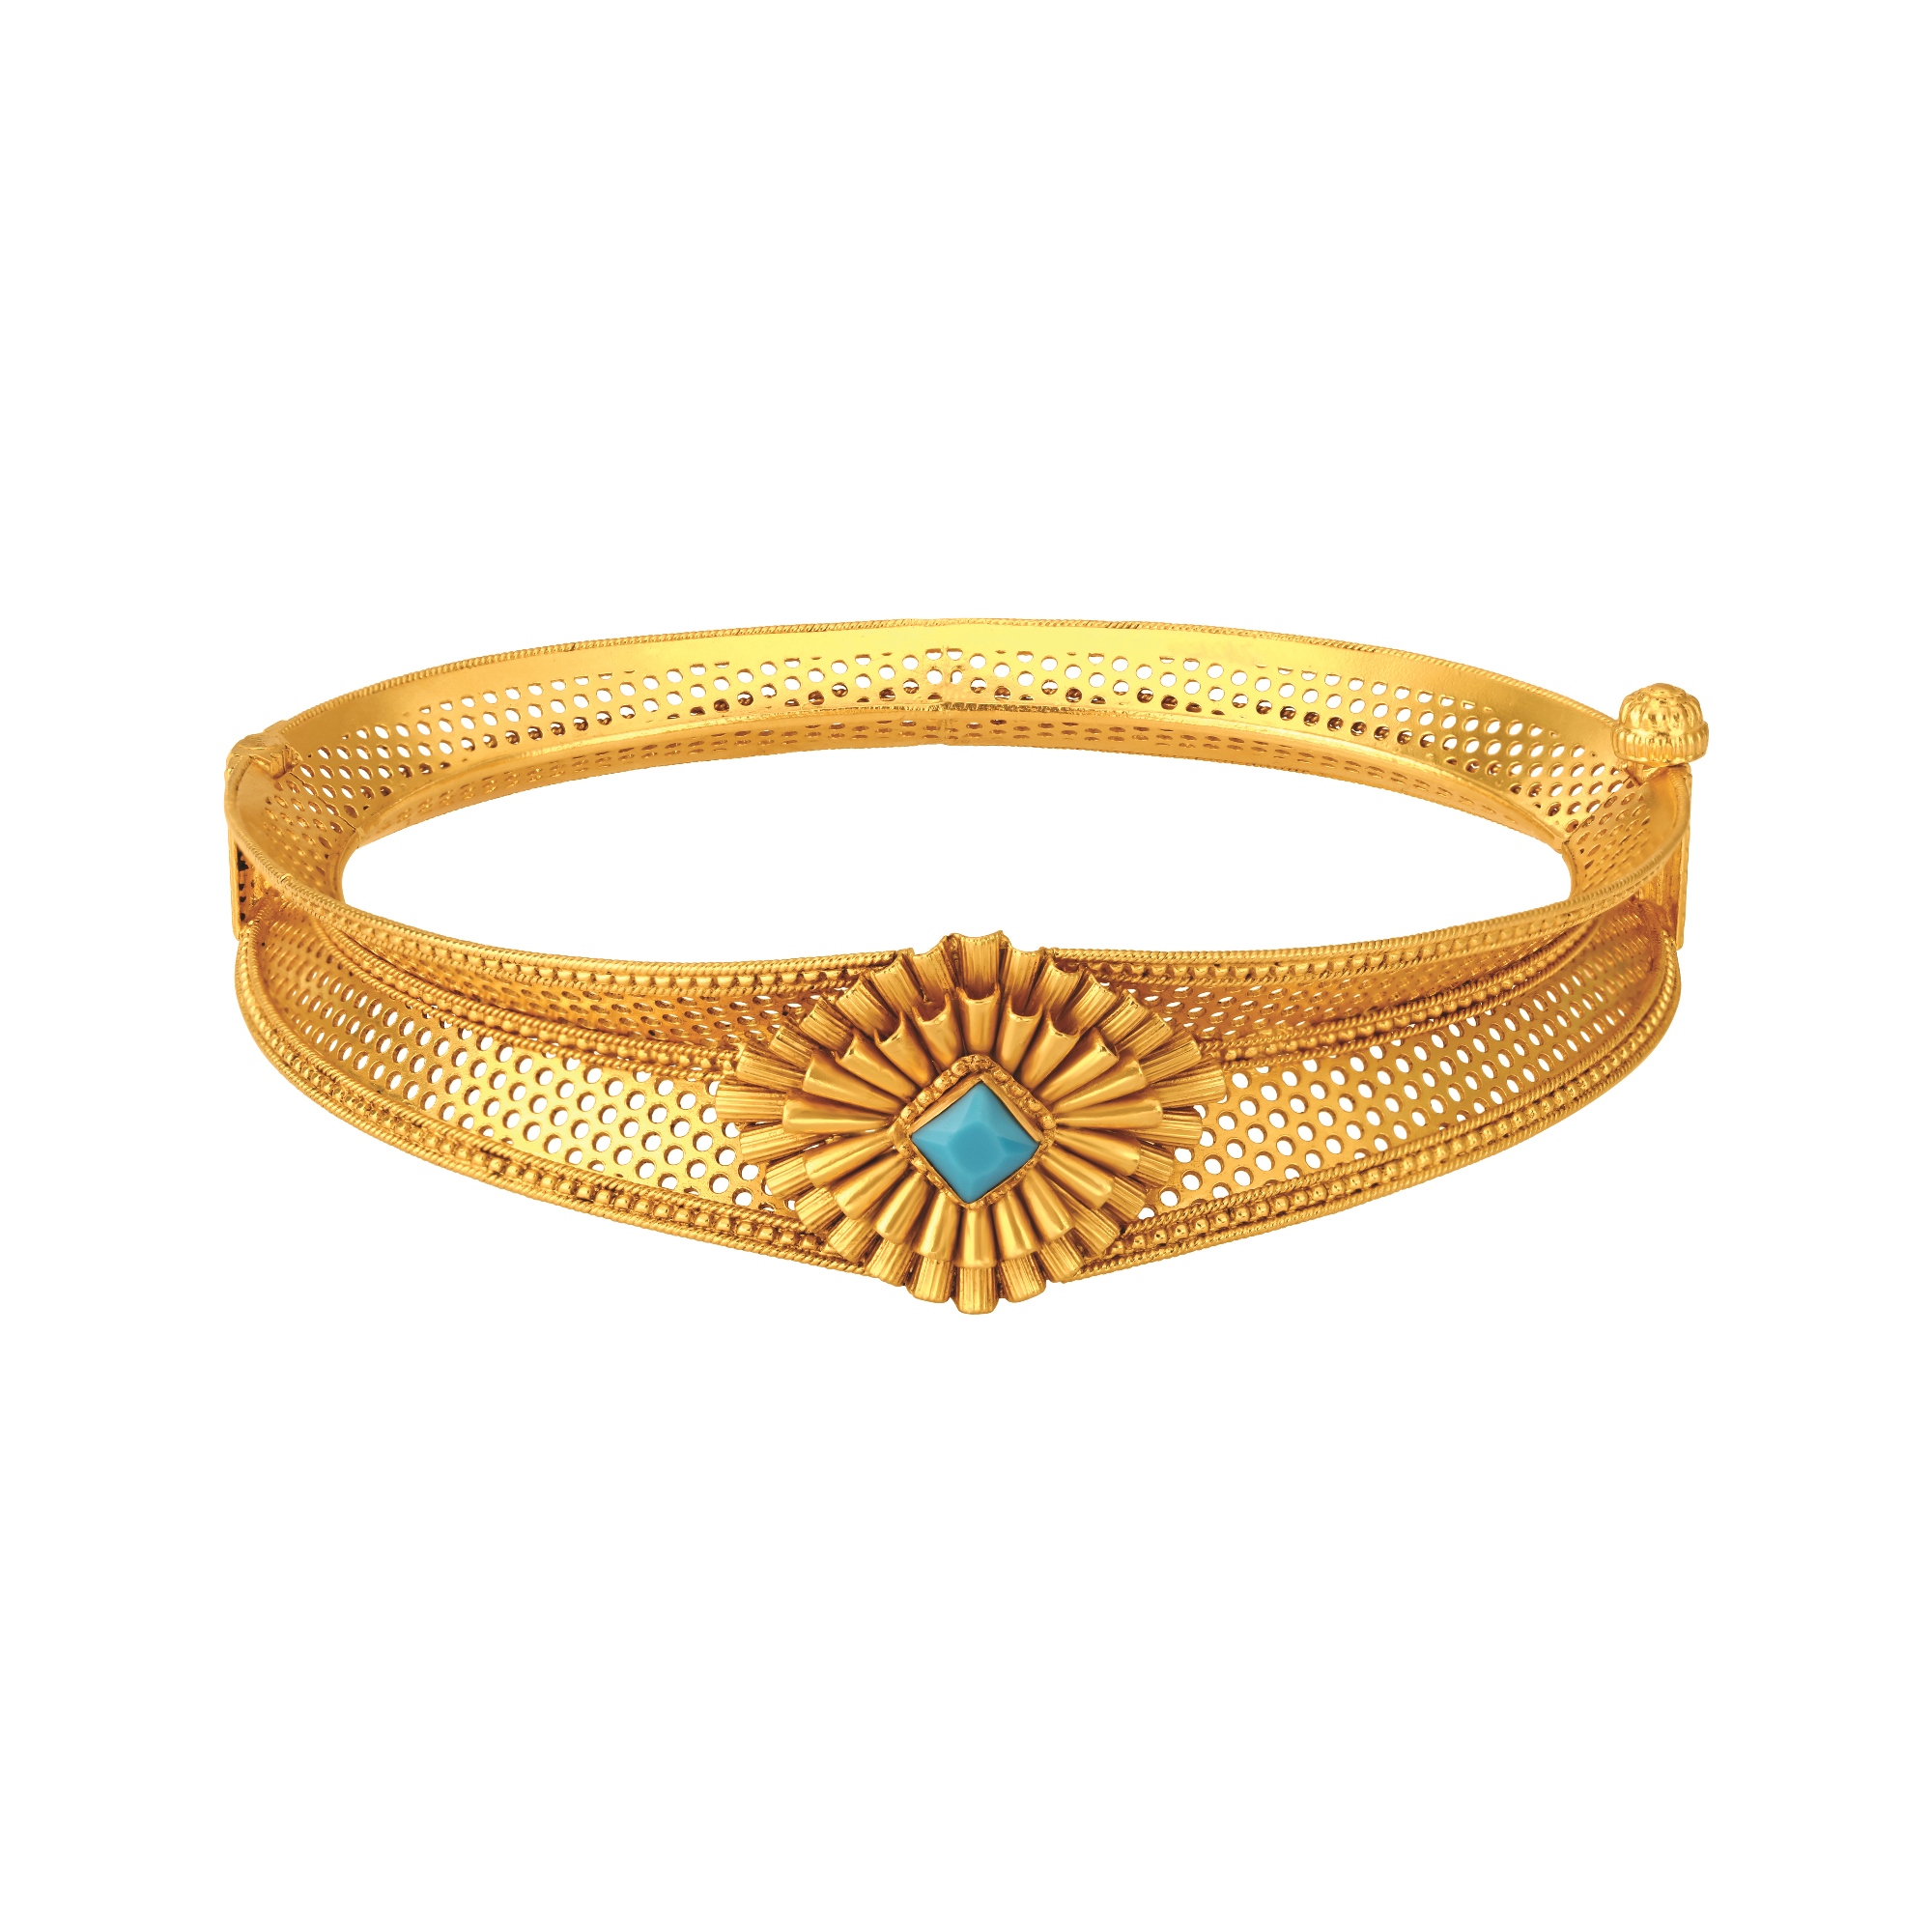 TANISHQ LAUNCHES ITS FESTIVE COLLECTION -‘UTSAAH’